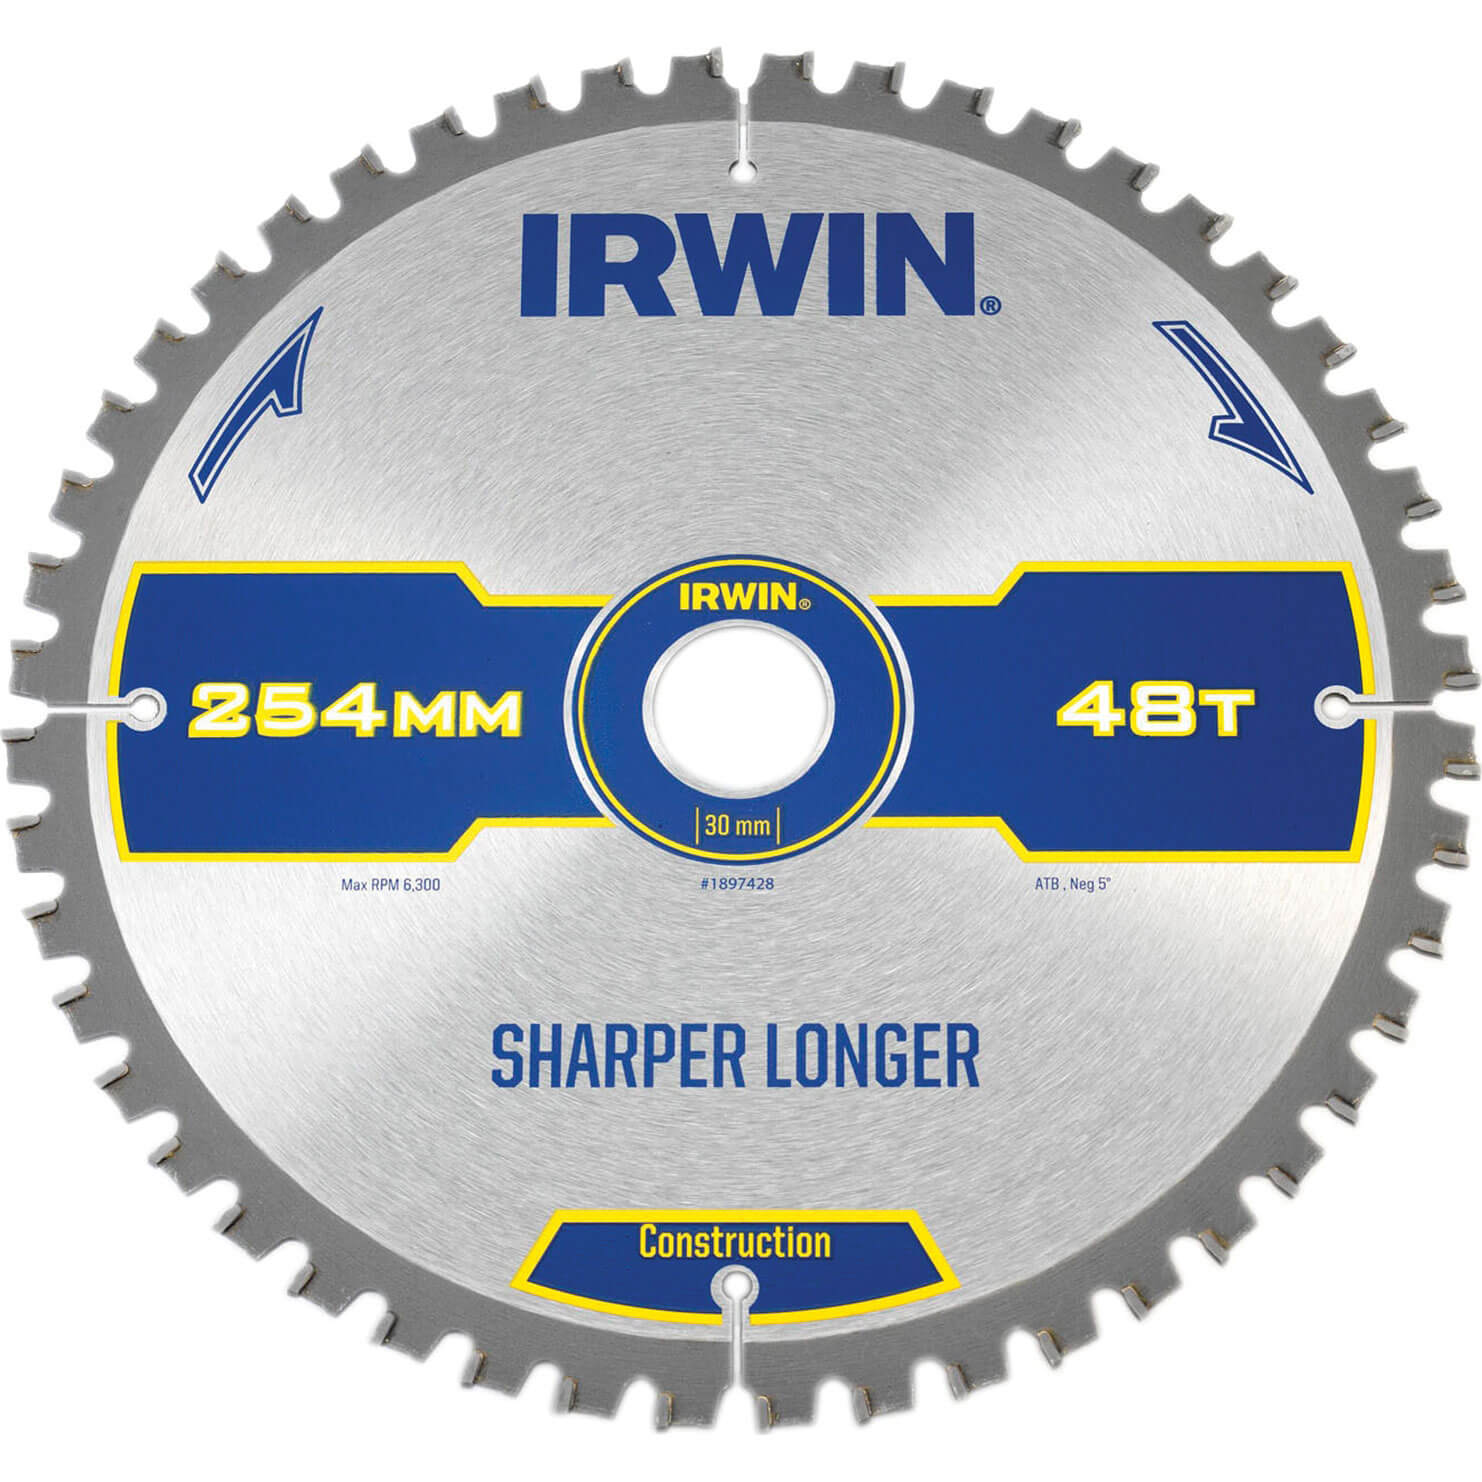 Image of Irwin ATB Ultra Construction Circular Saw Blade 254mm 48T 30mm